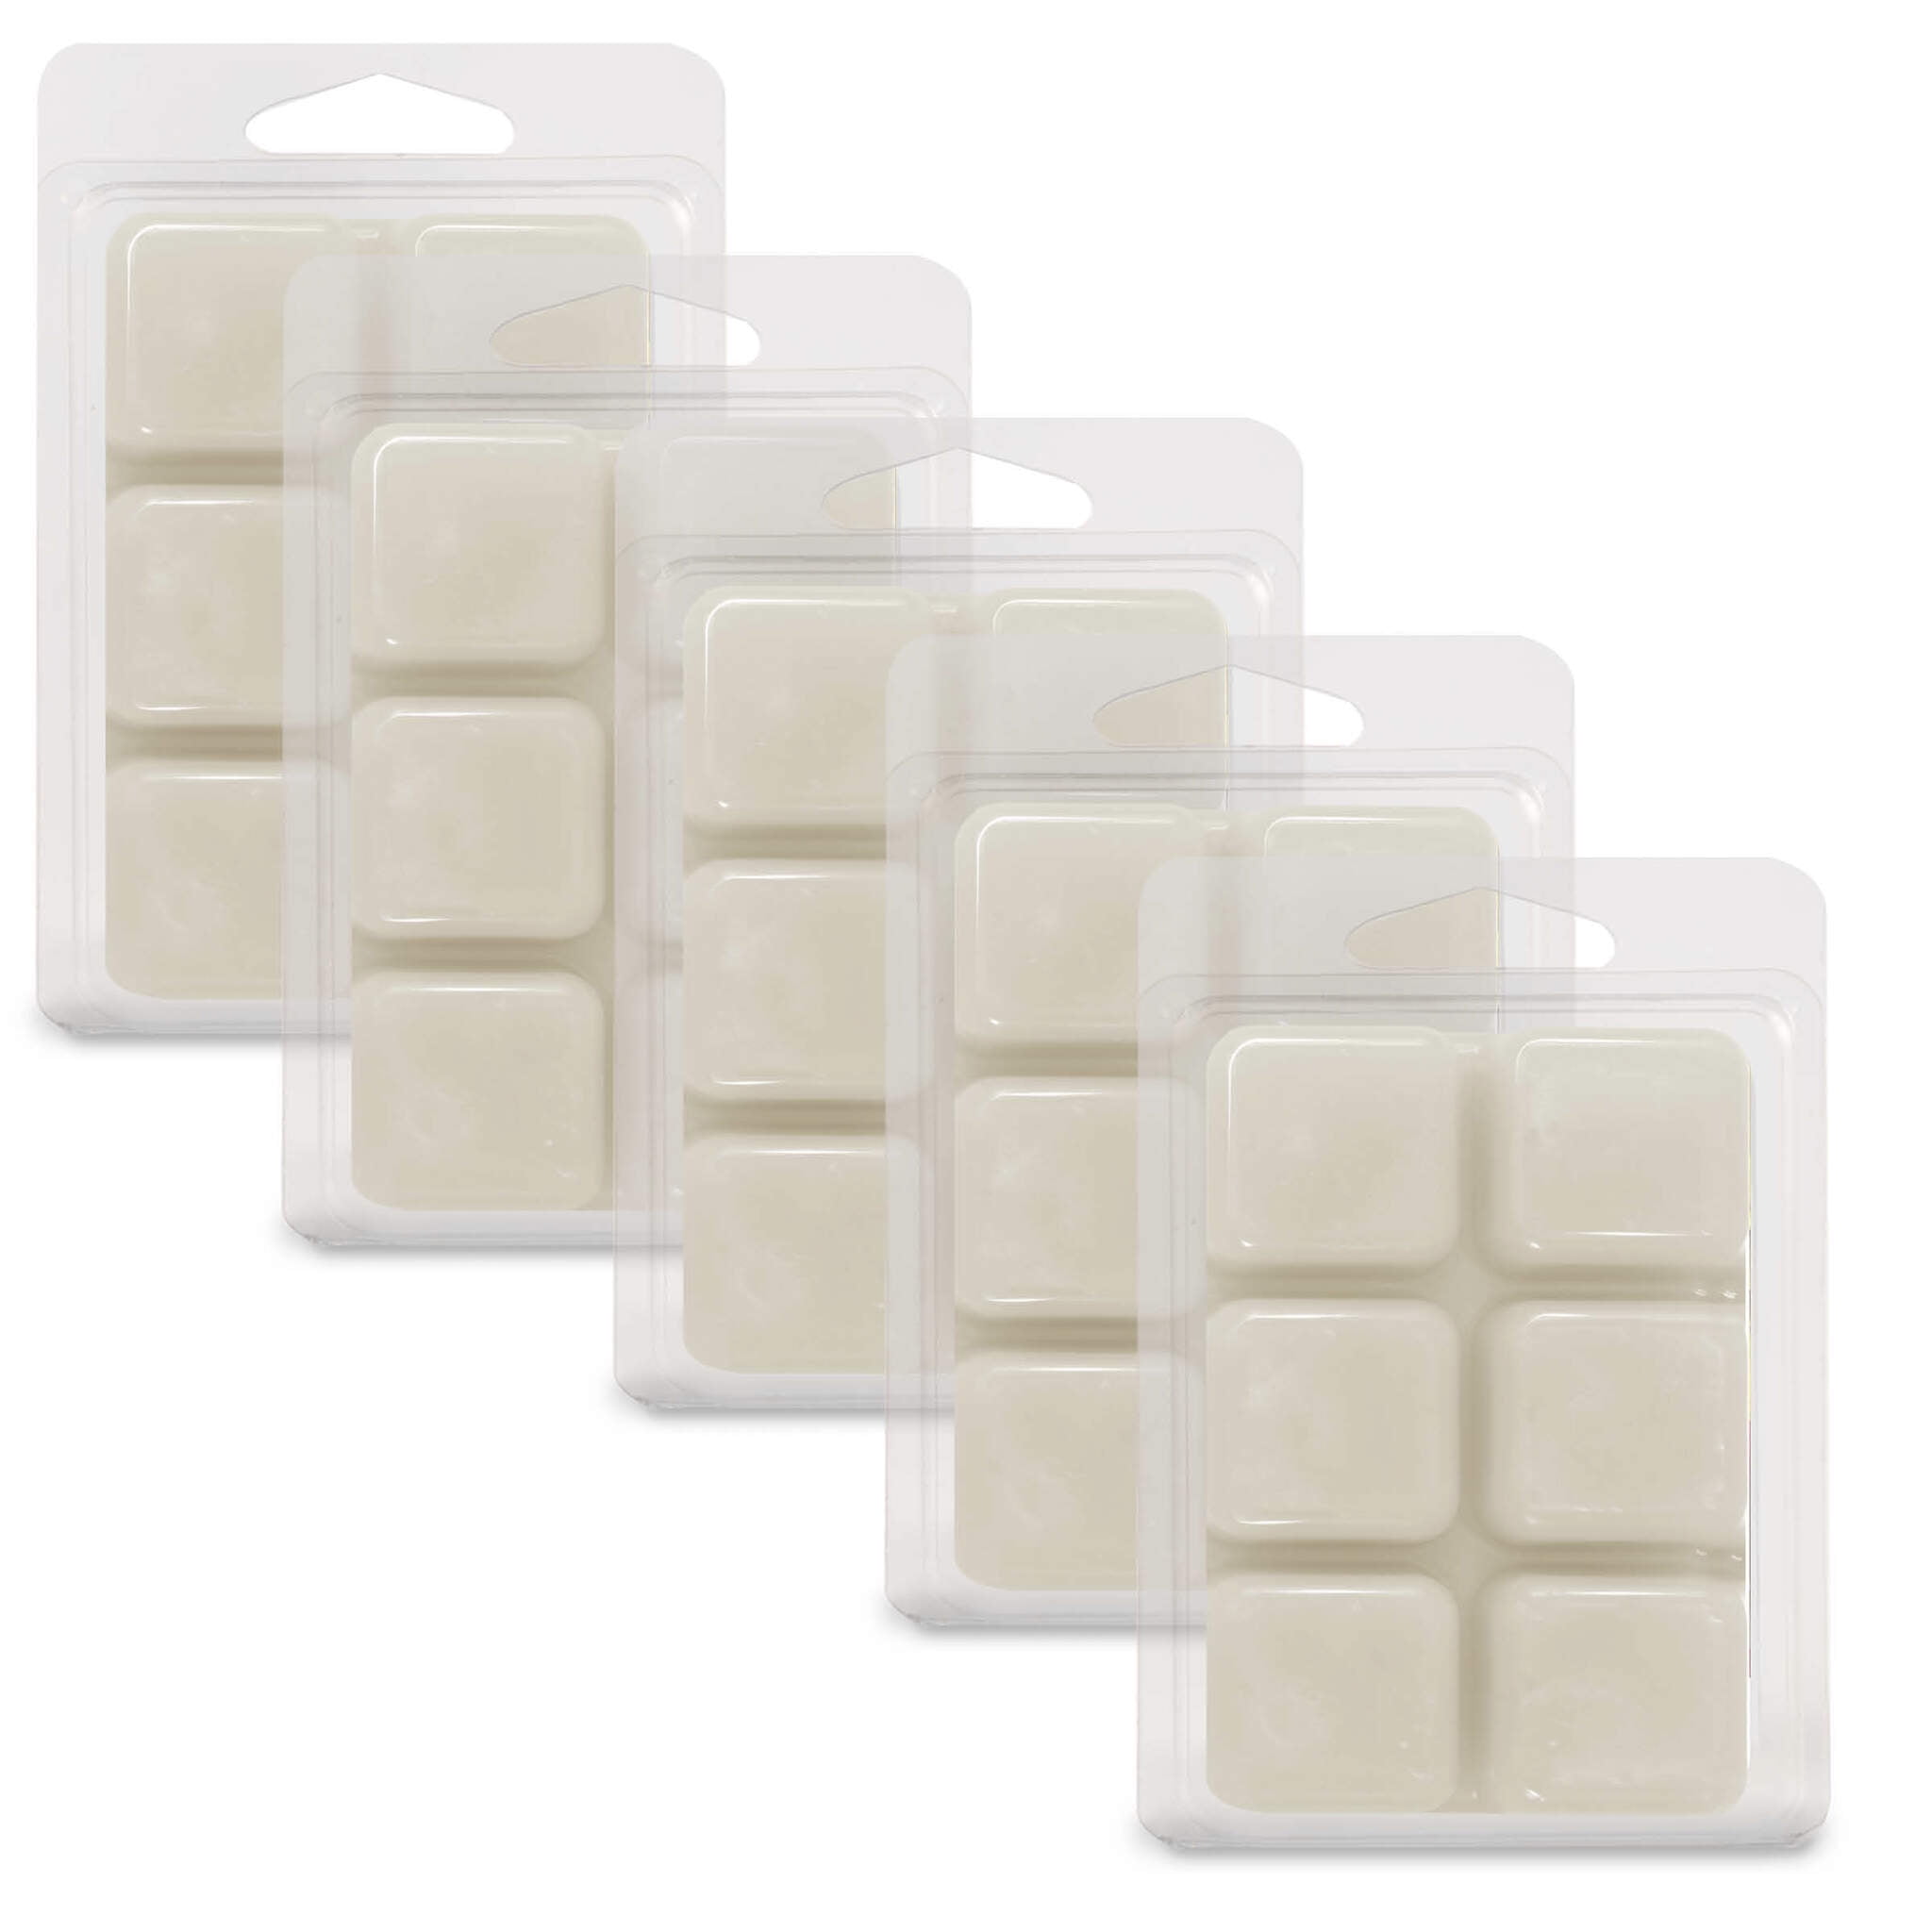 5 Gel Wax Melts For £12 - Pick n Mix! – Gower Scents